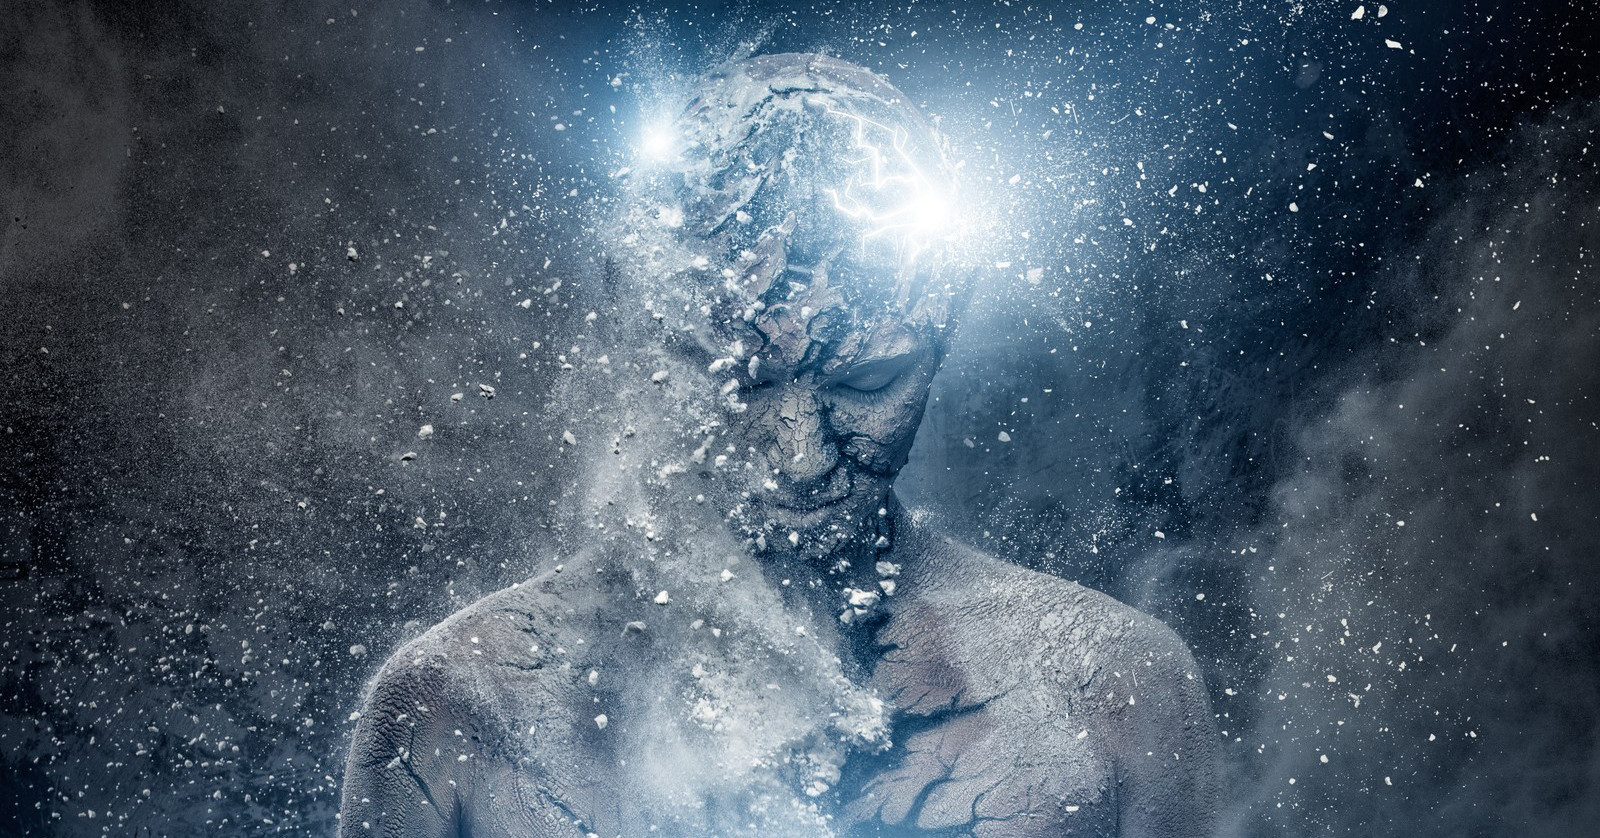 9 Methods for Dealing with Psychic Energy Attack in Your Field